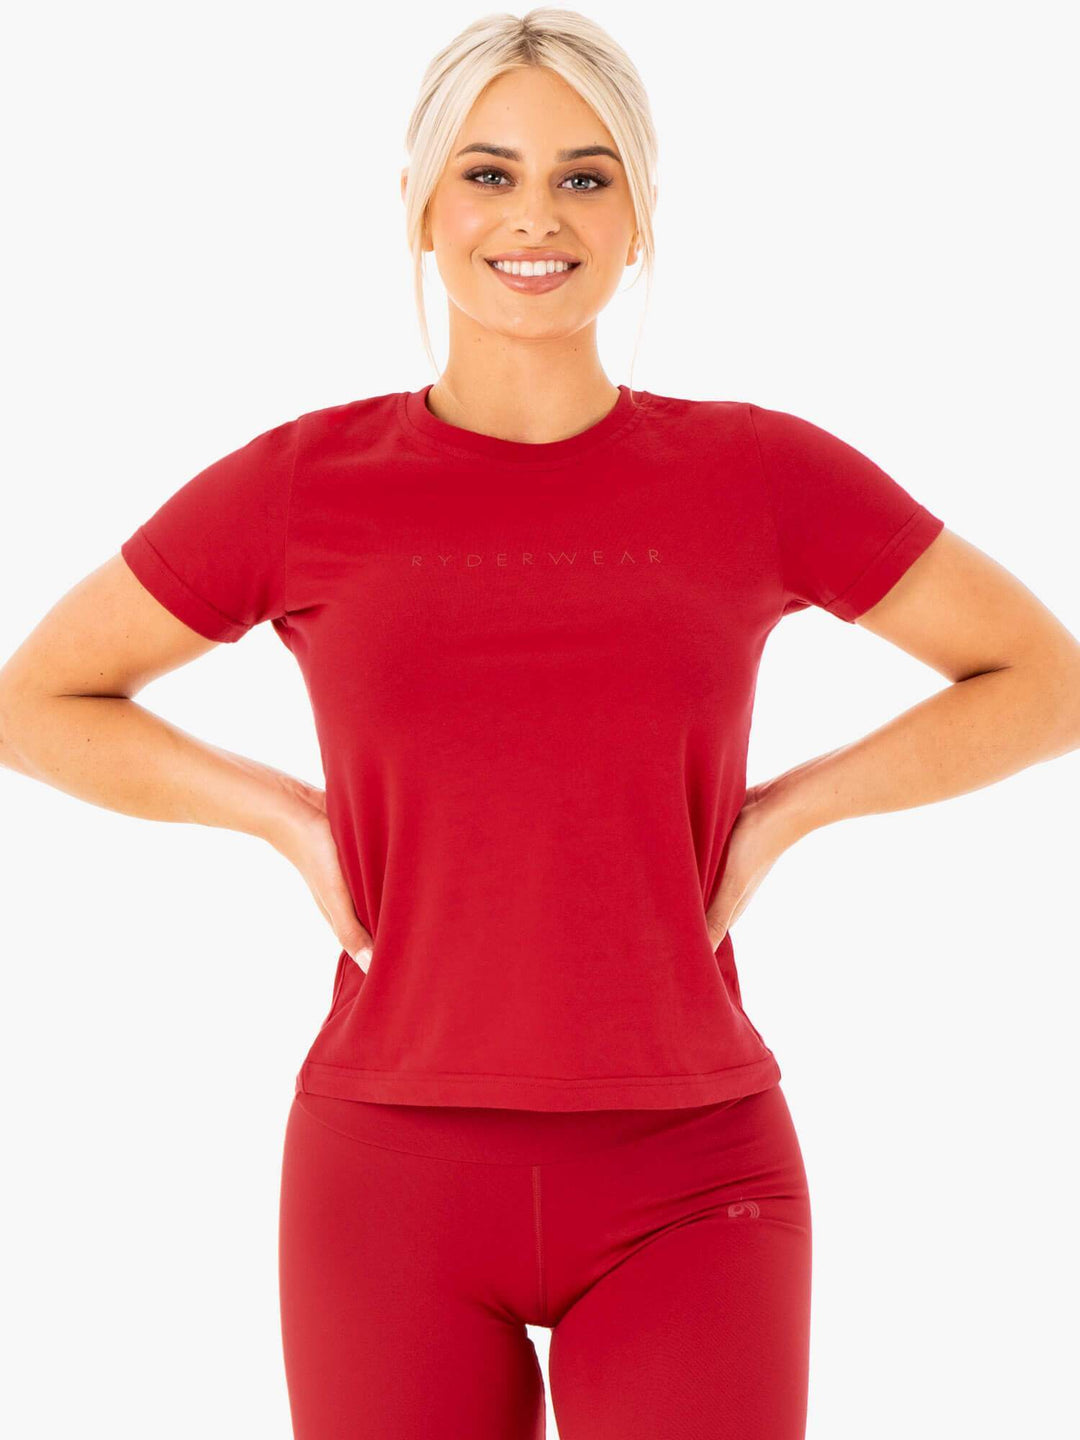 Motion T-Shirt - Red Clothing Ryderwear 